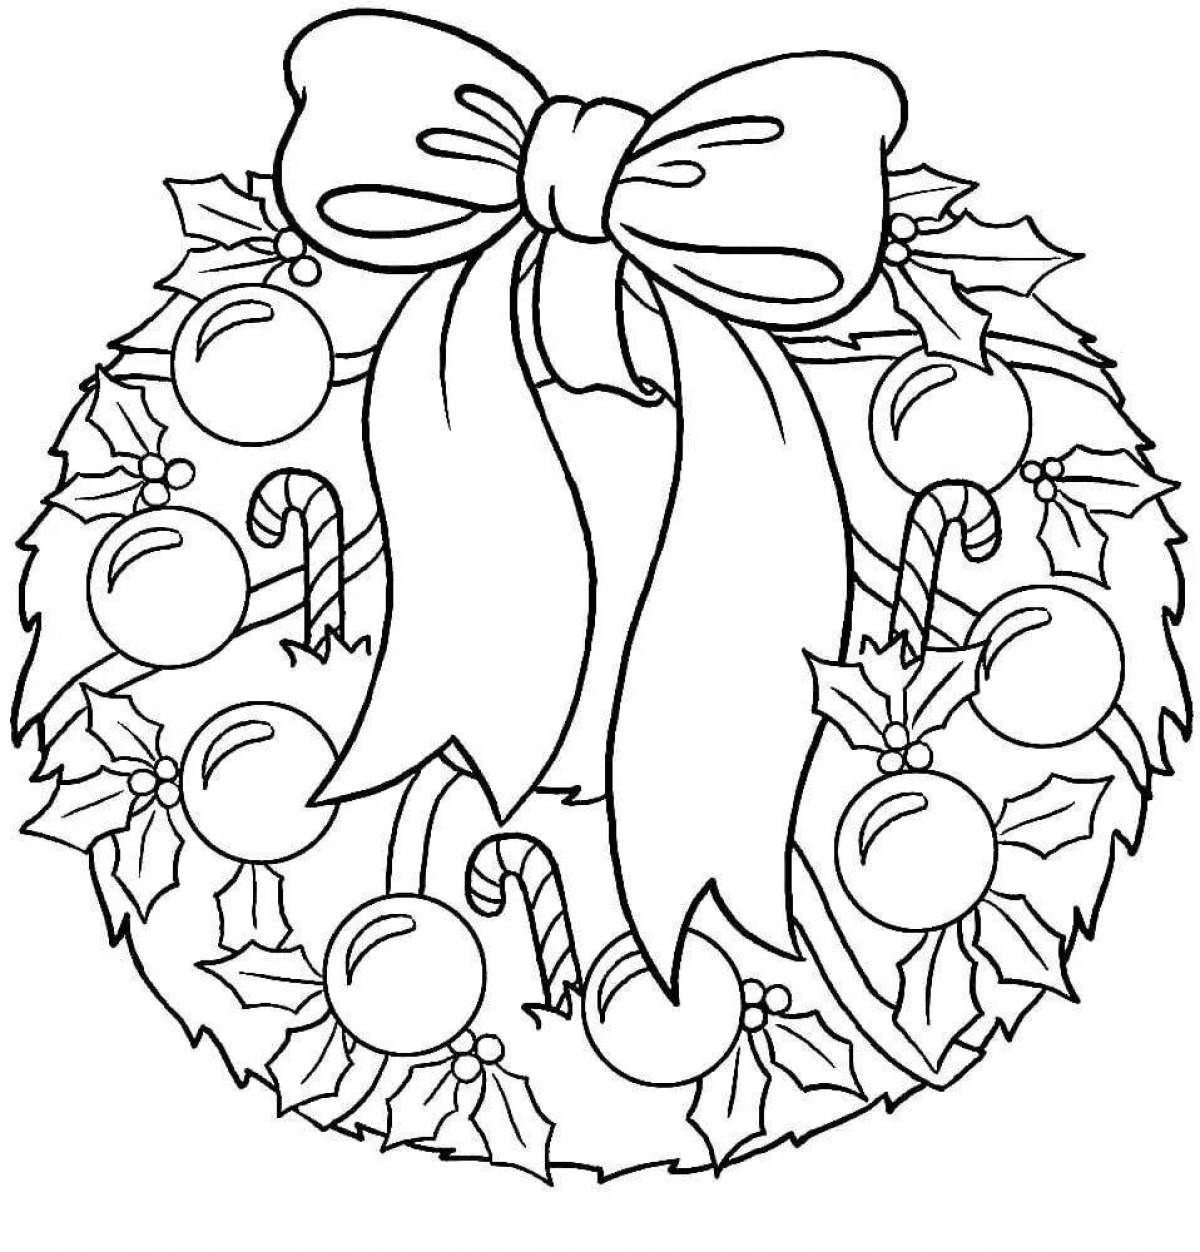 Sparkling Christmas coloring book